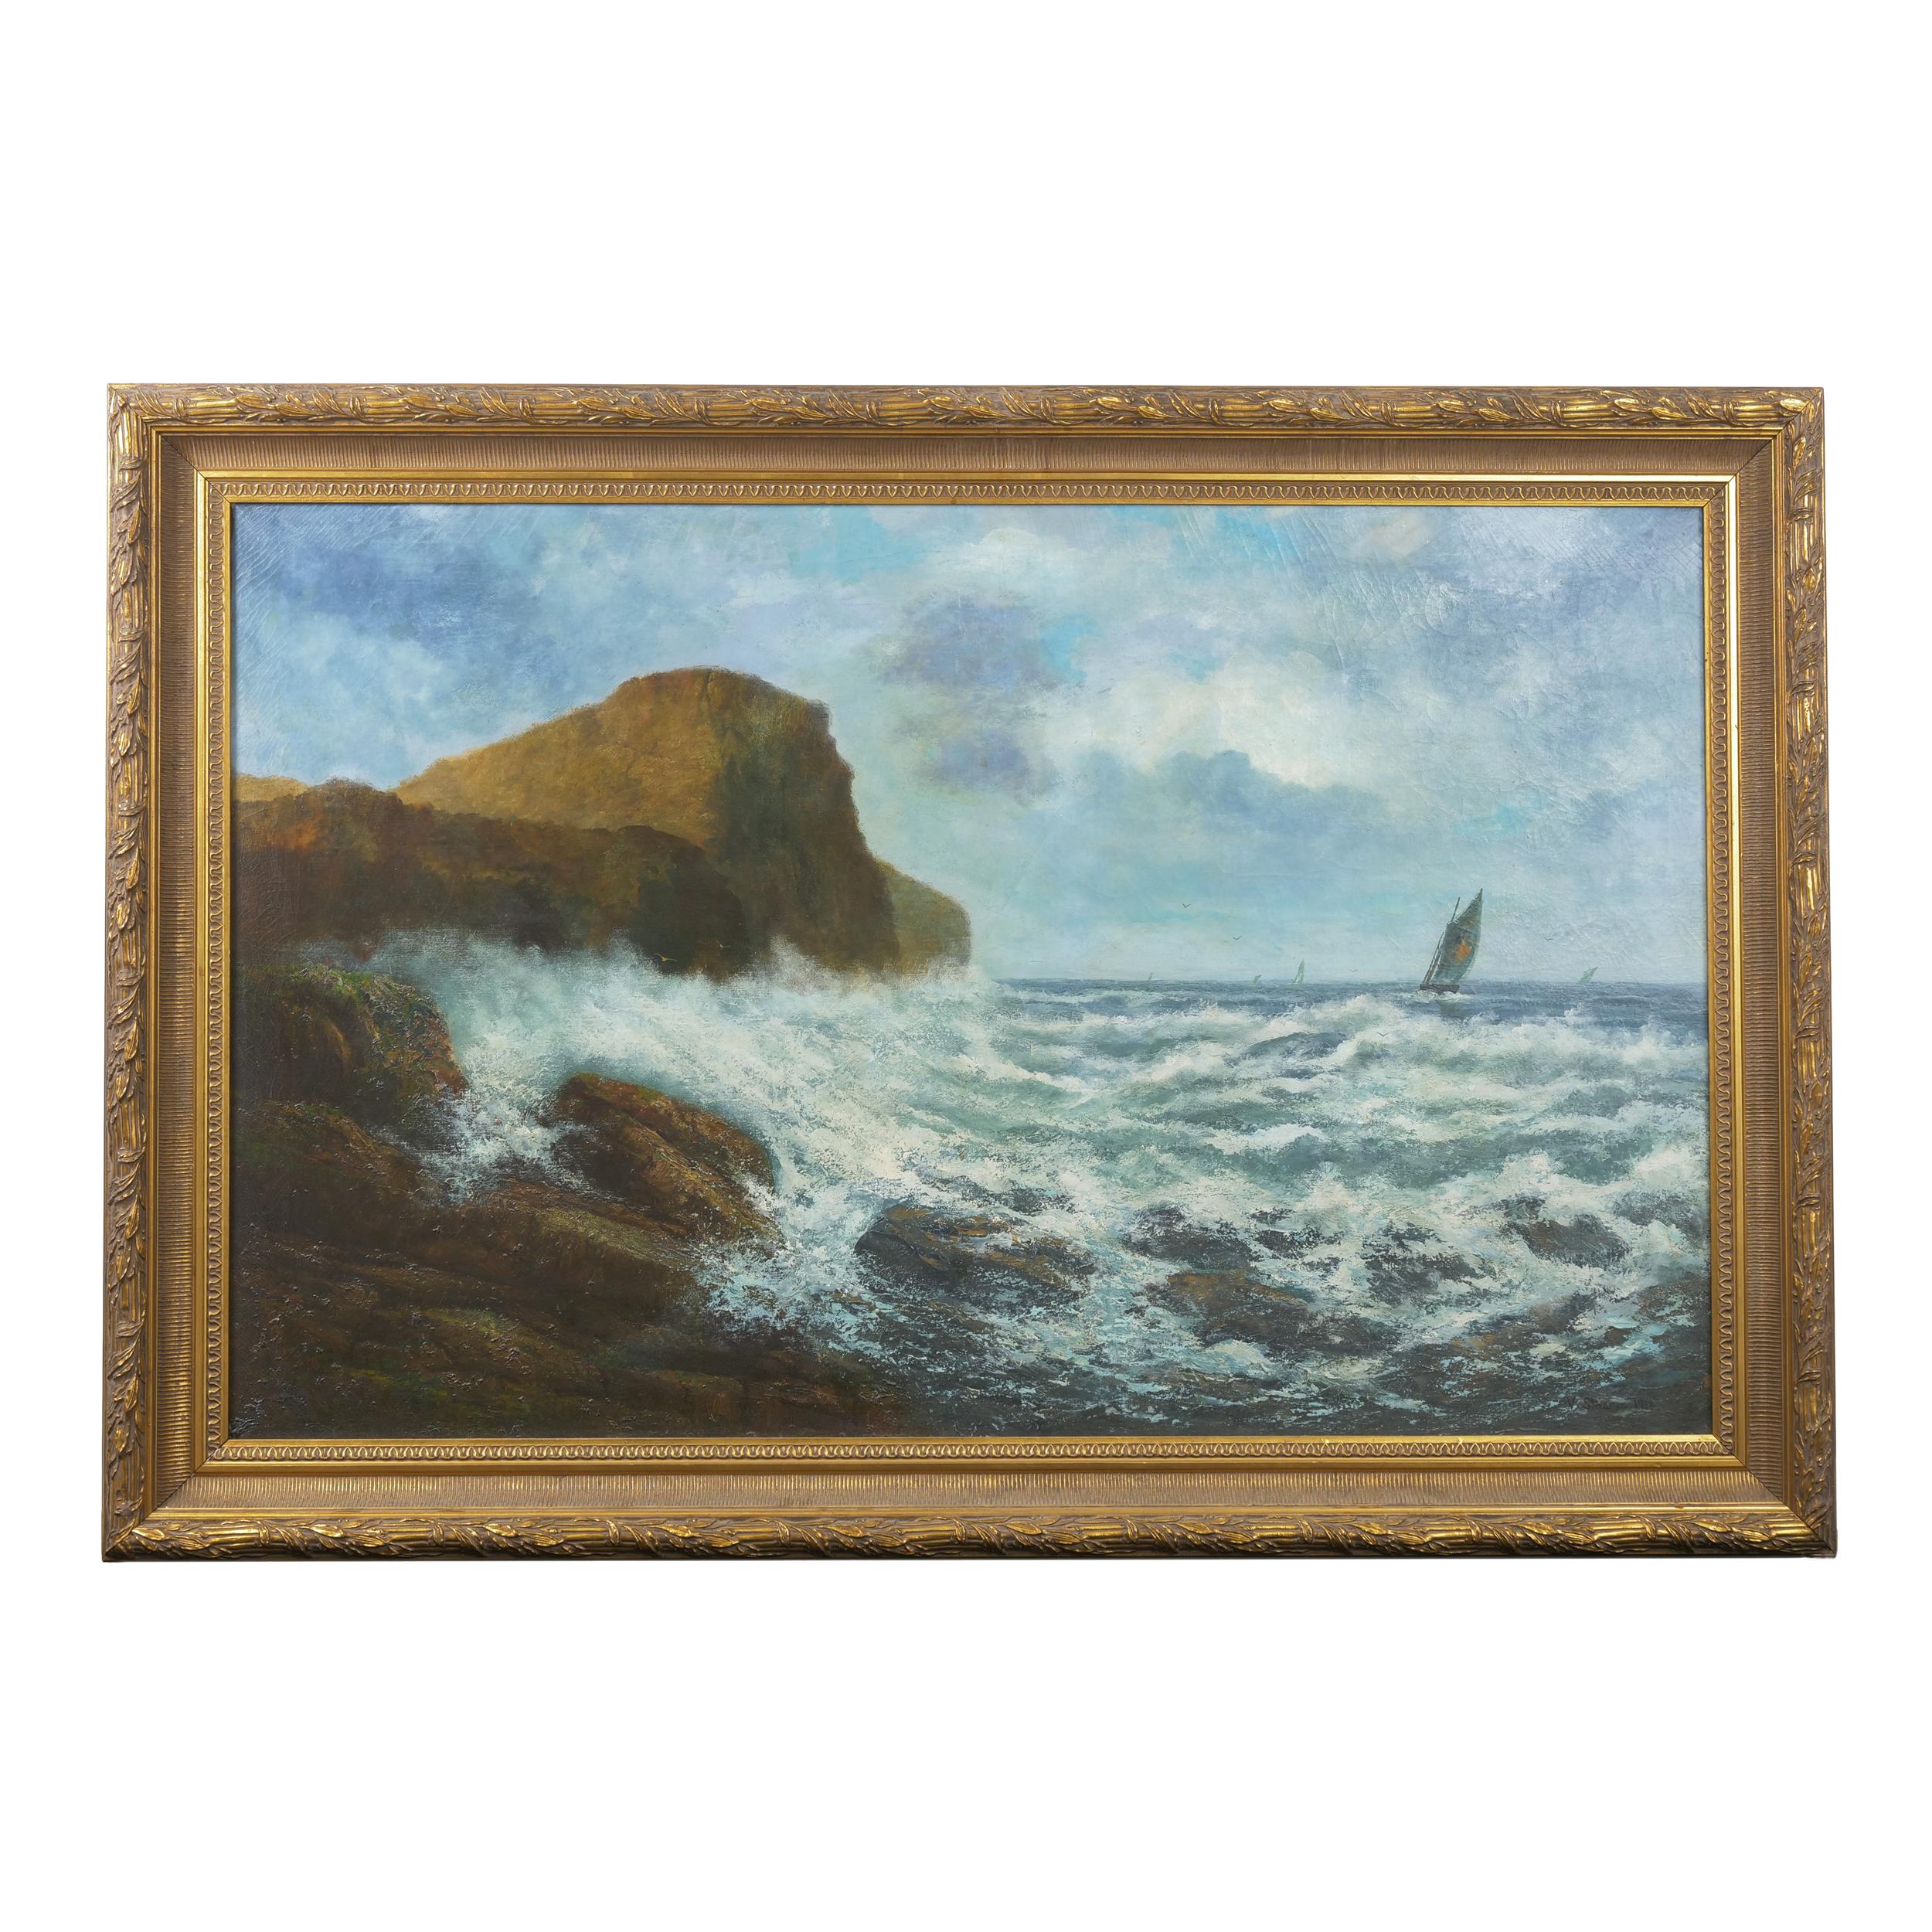 A massive coastal seascape painting by Pennsylvania artist Victor Shearer, the scene captures the tumultuous coastline as the waves break against the rocks below bright blue skies. With a heavy and thick impasto that layers and builds significant